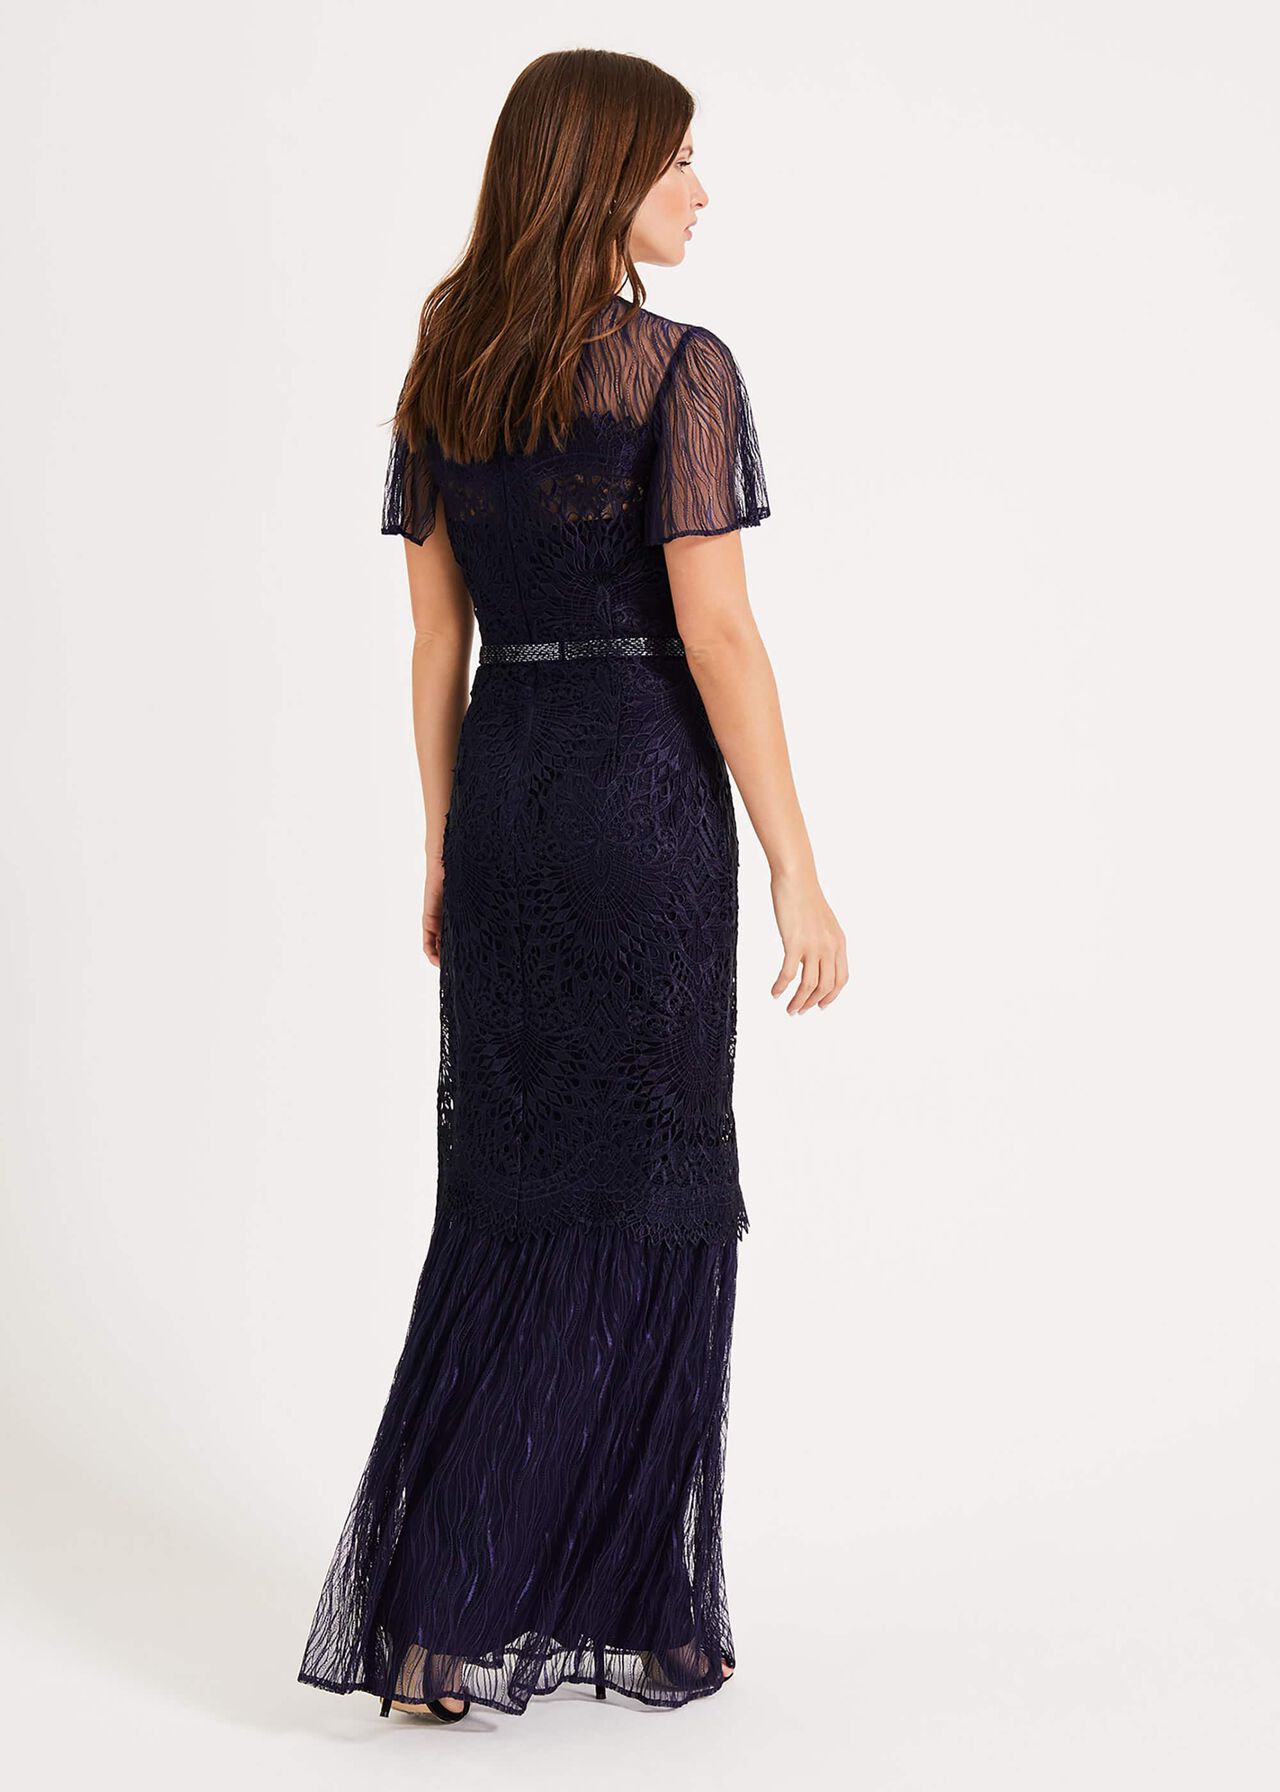 Cayleigh Lace Maxi Dress